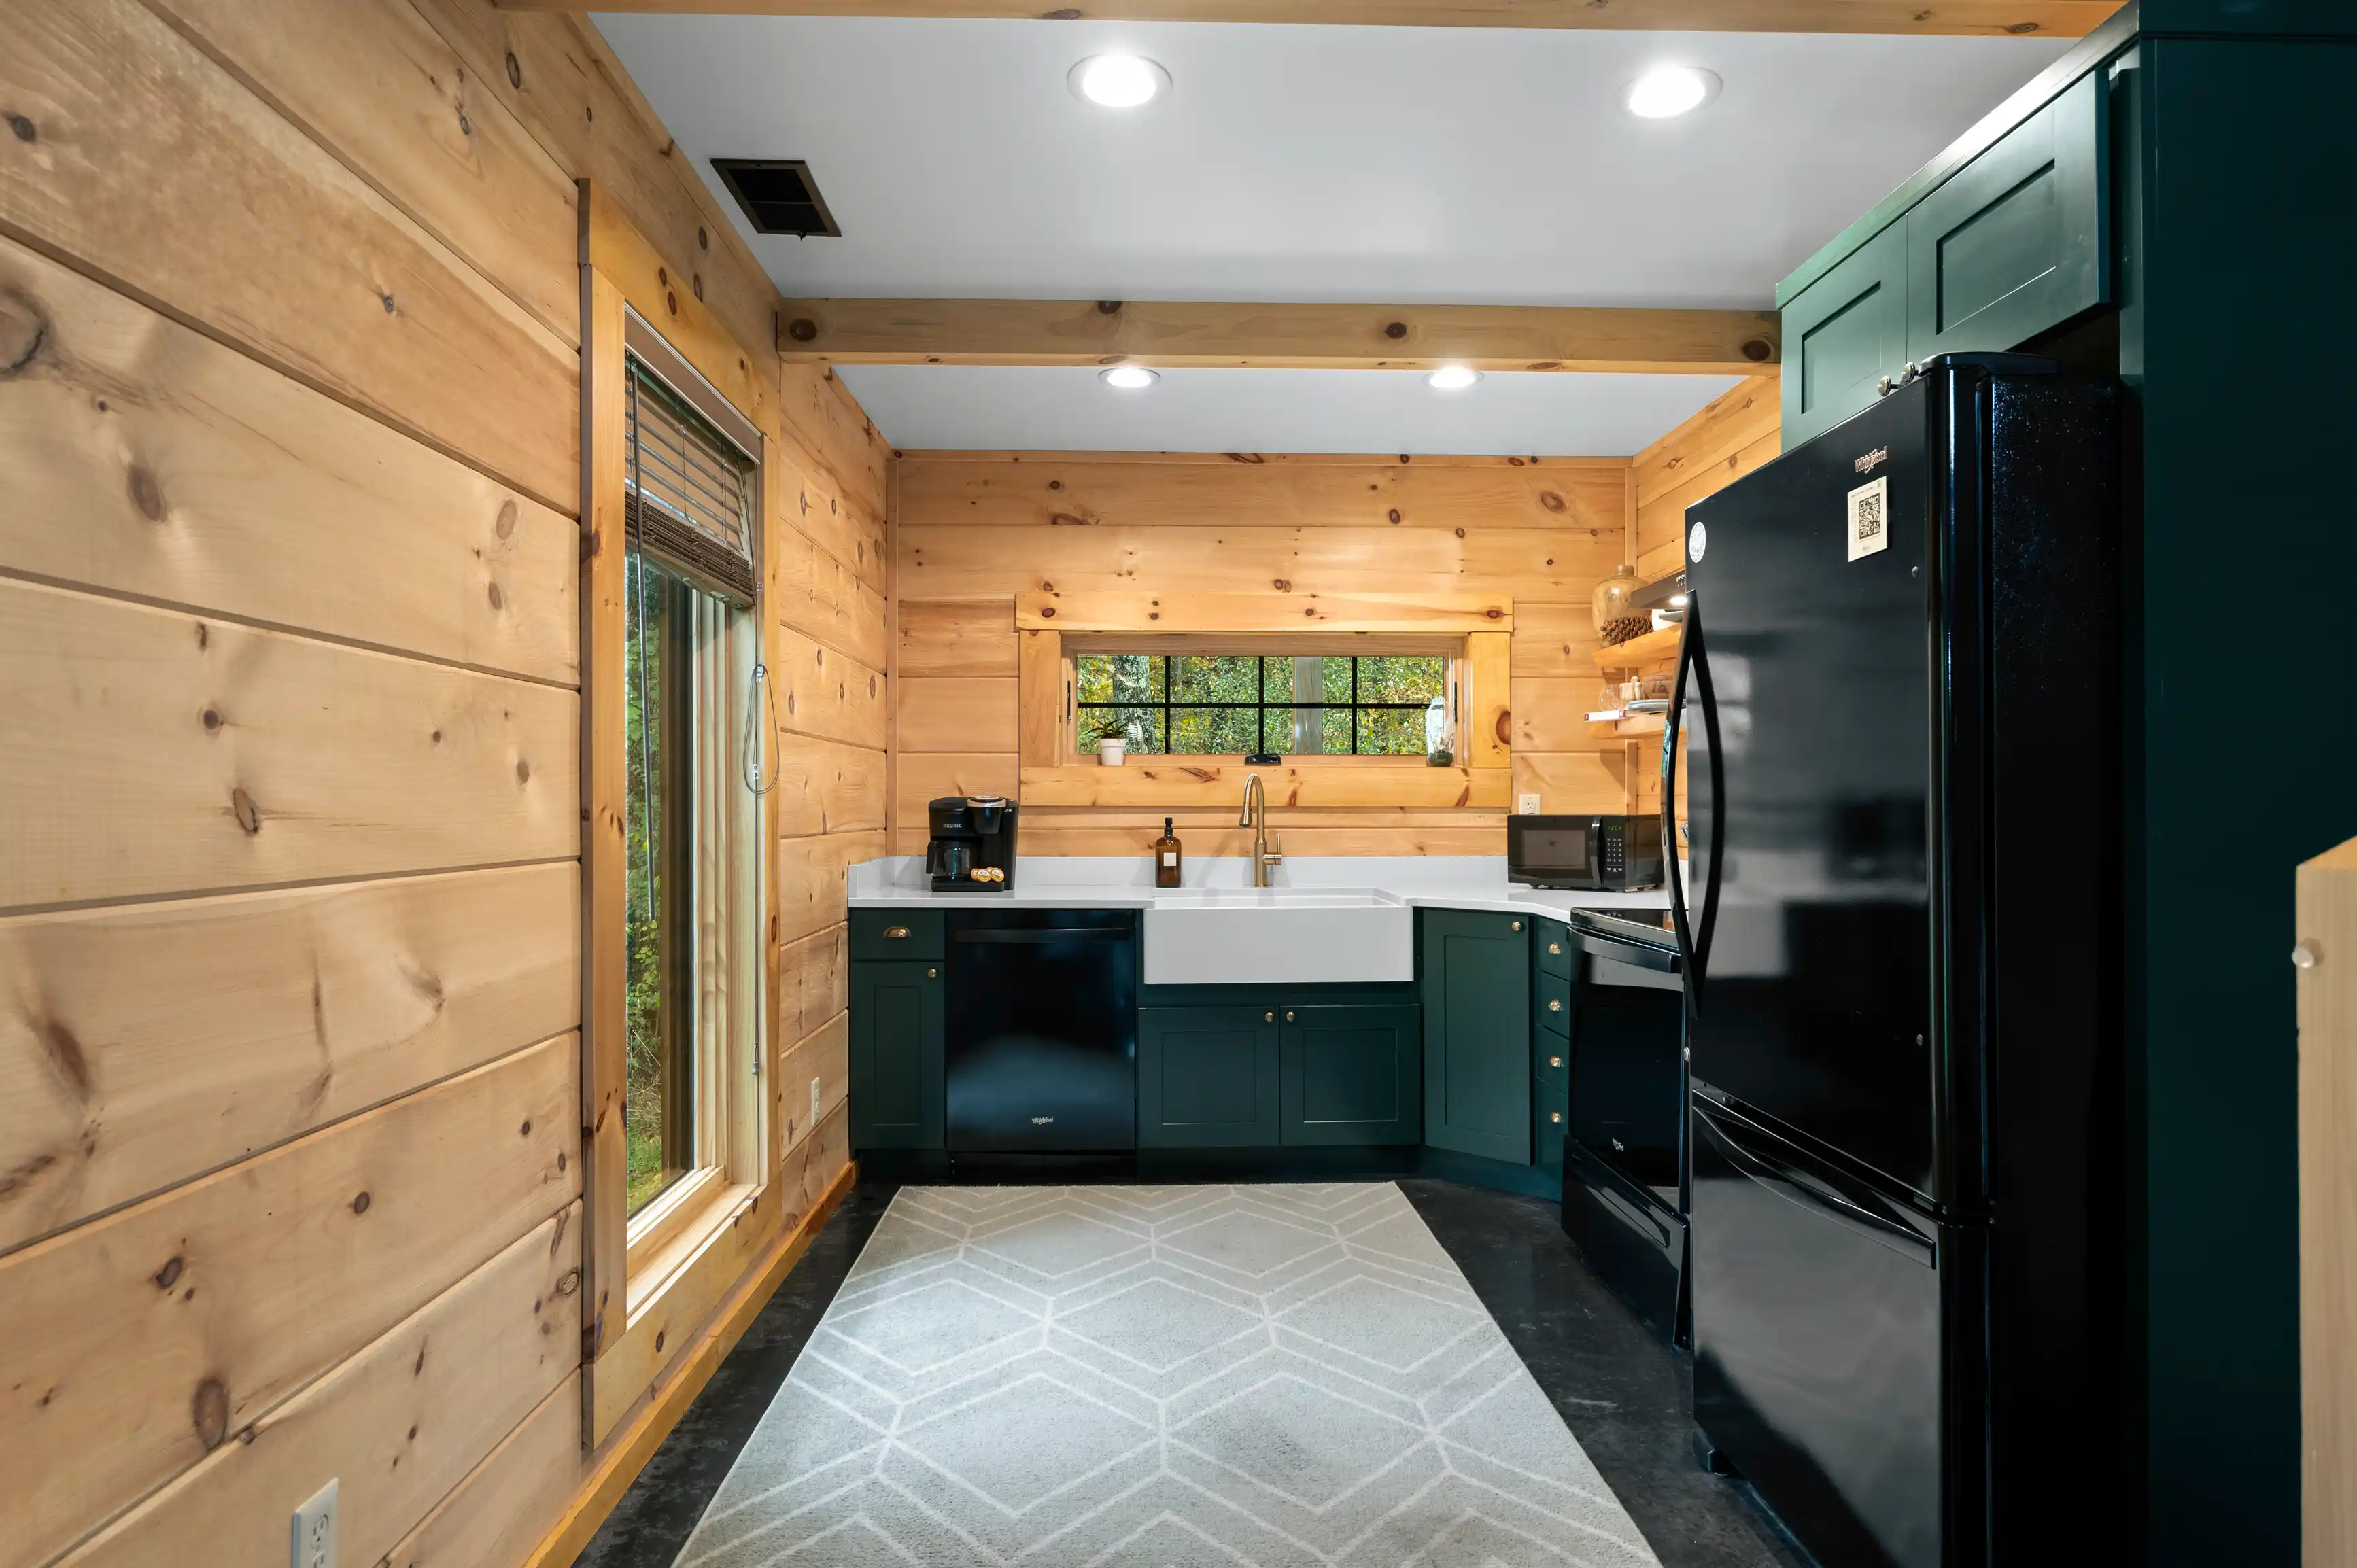 Interior view of a kitchen with dark green cabinets, wooden walls, and modern appliances, featuring a geometric patterned rug on the floor.